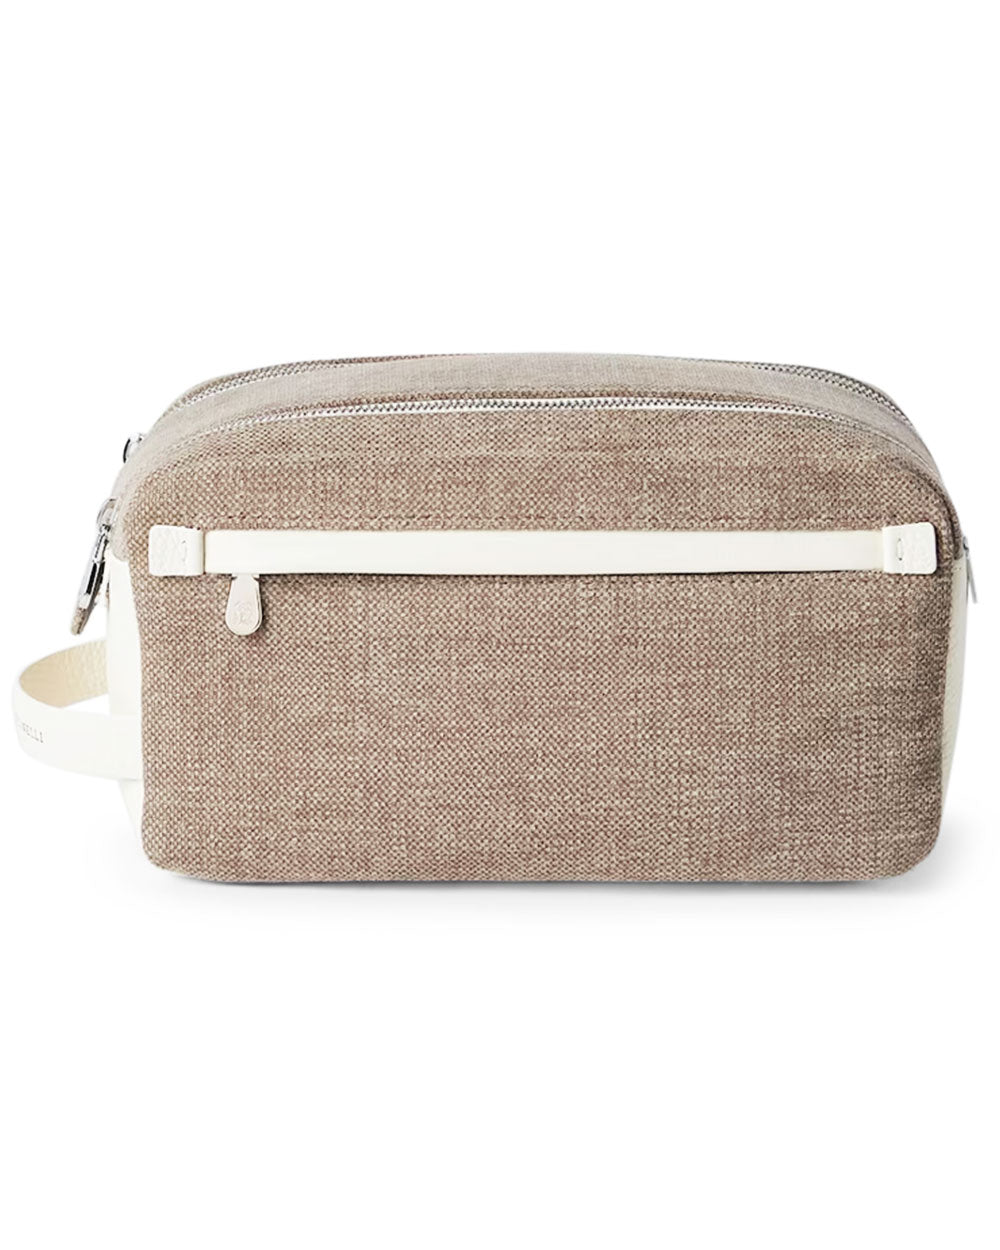 Brown and Cream Canvas and Grained Calfskin Leather Dopp Kit